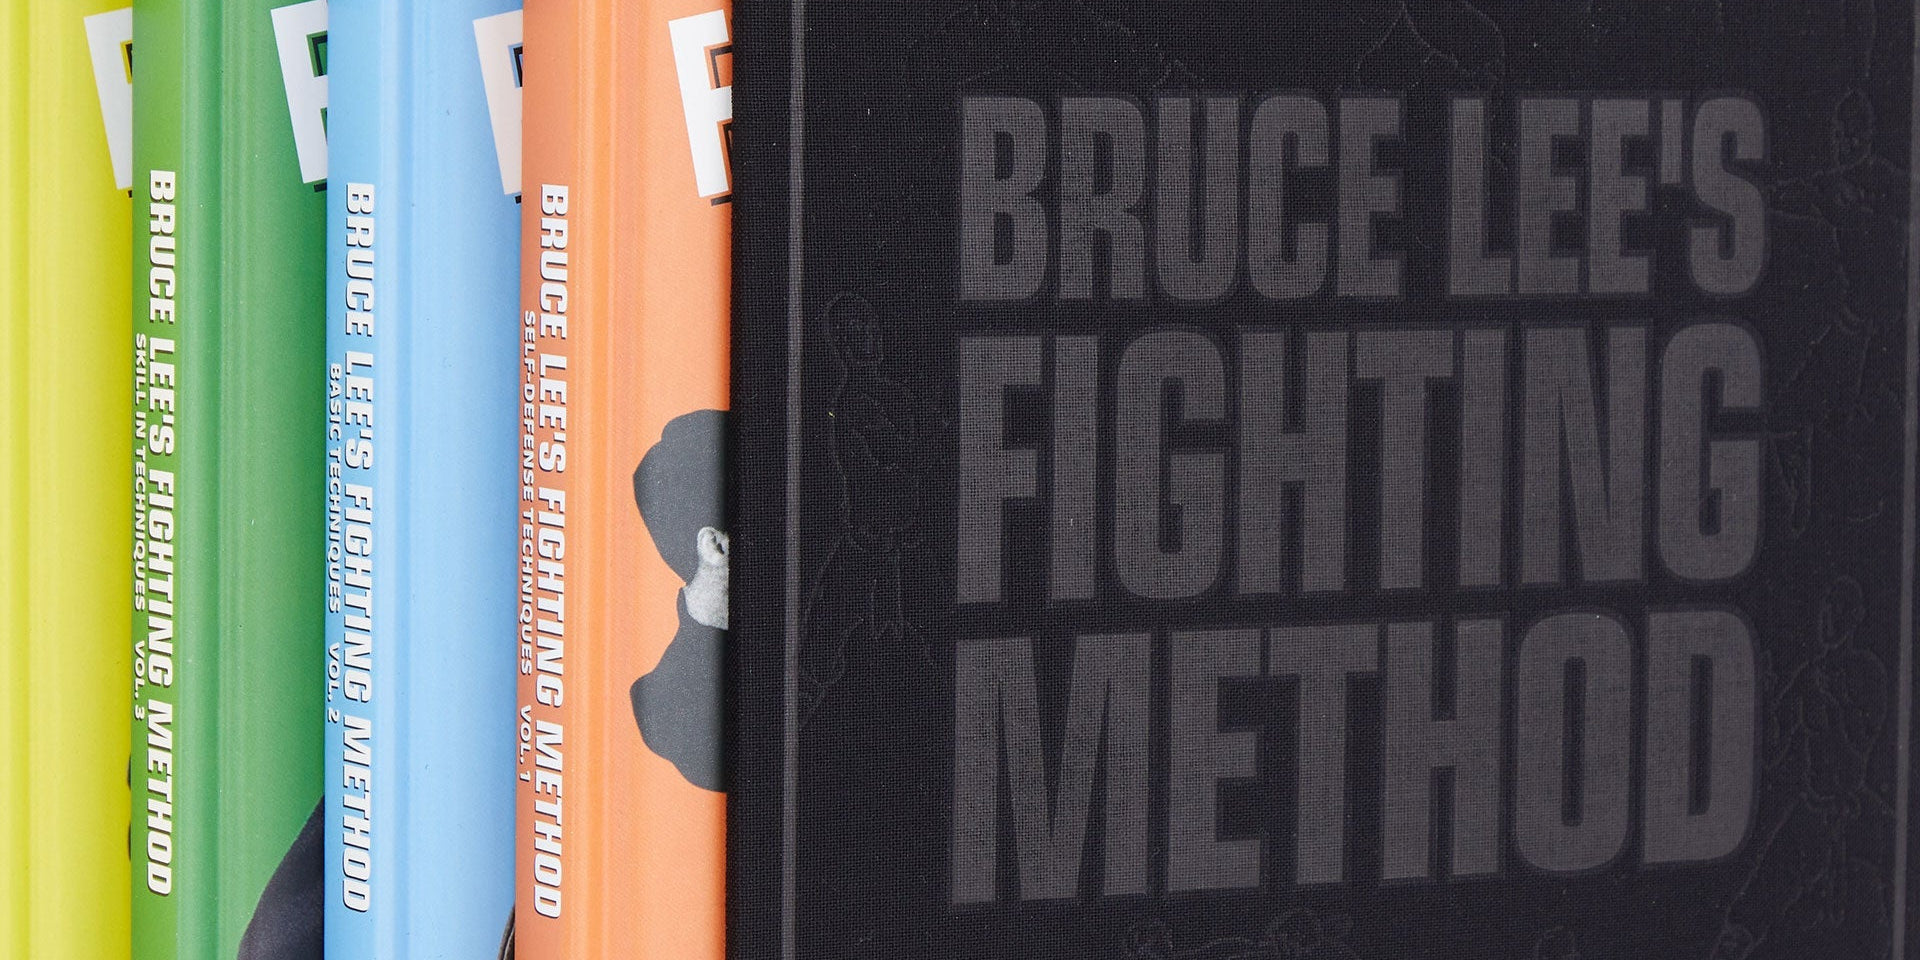 Bruce Lee books lined up